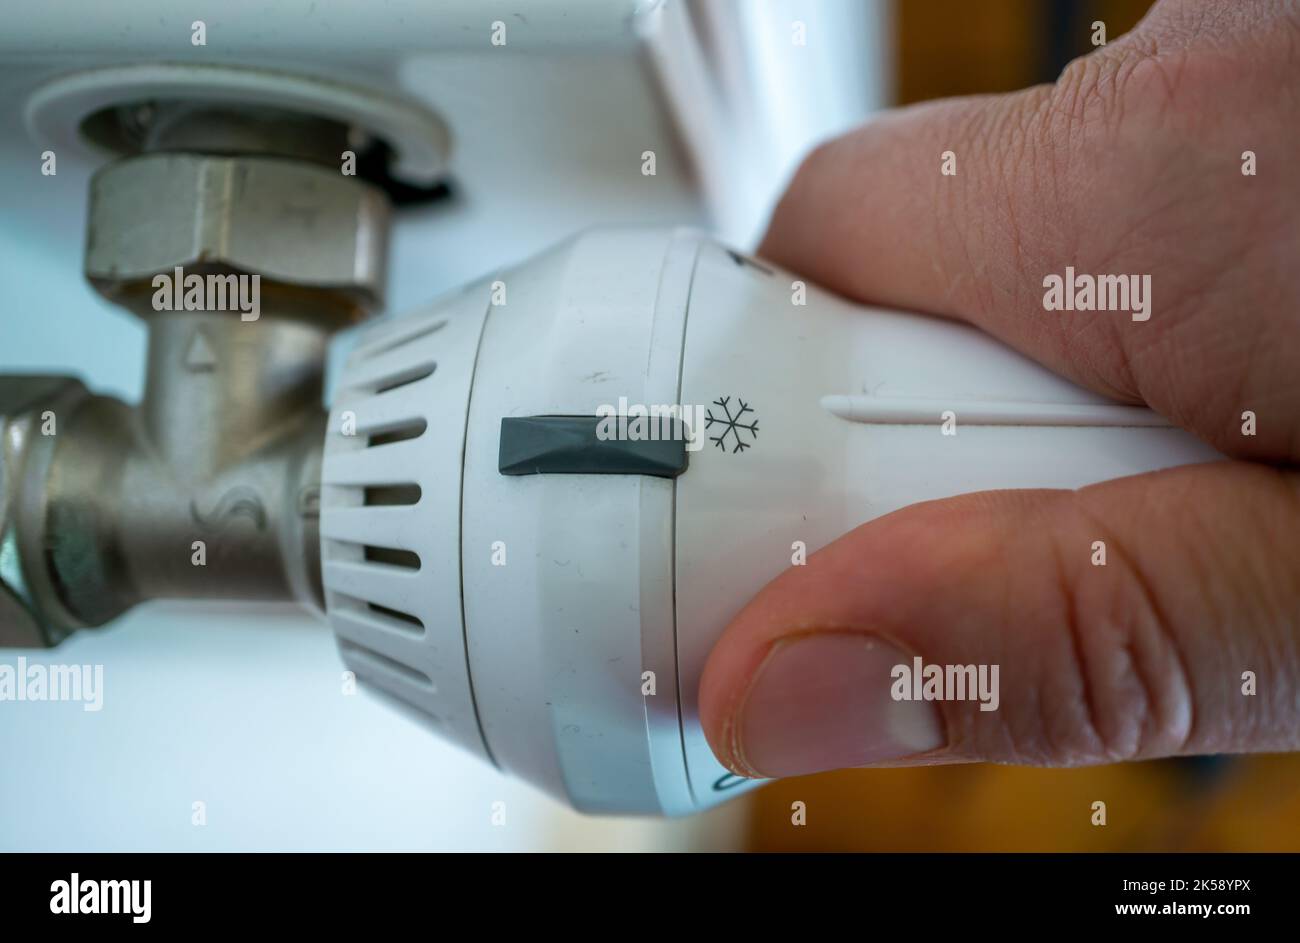 Turn off the heating to save energy during the ukraine war in Germany Stock Photo